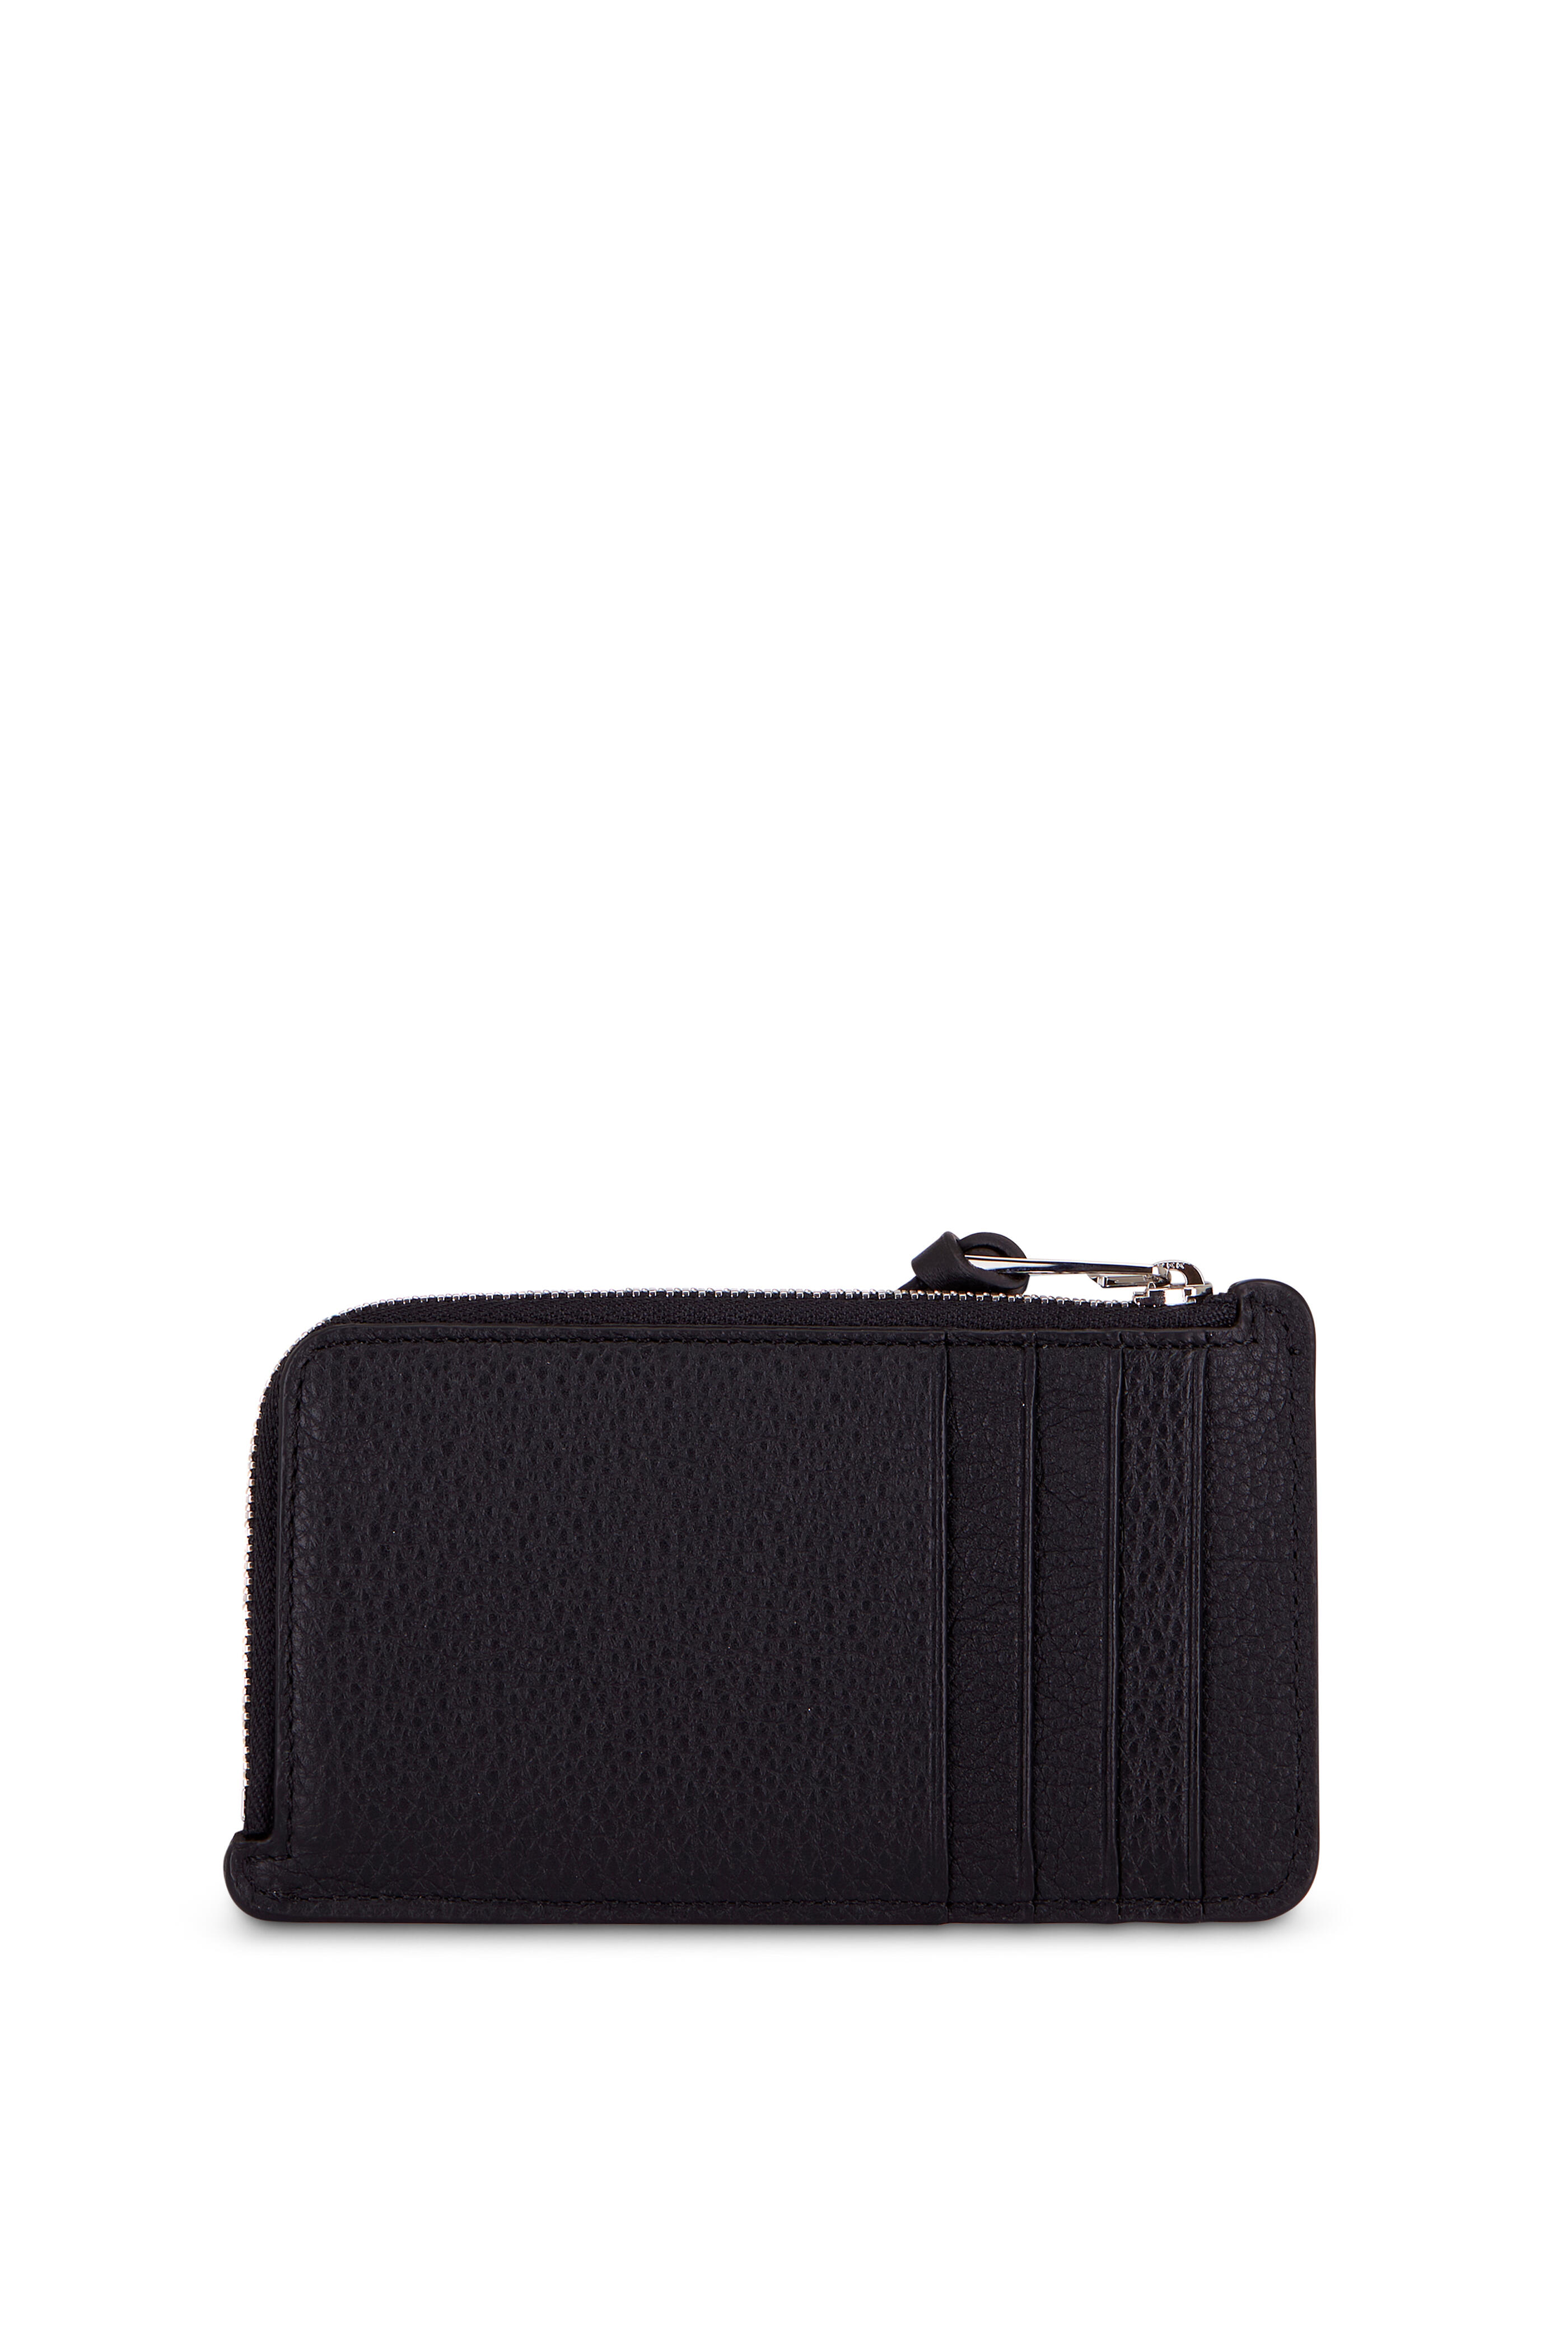 Loewe Leather Coin Cardholder